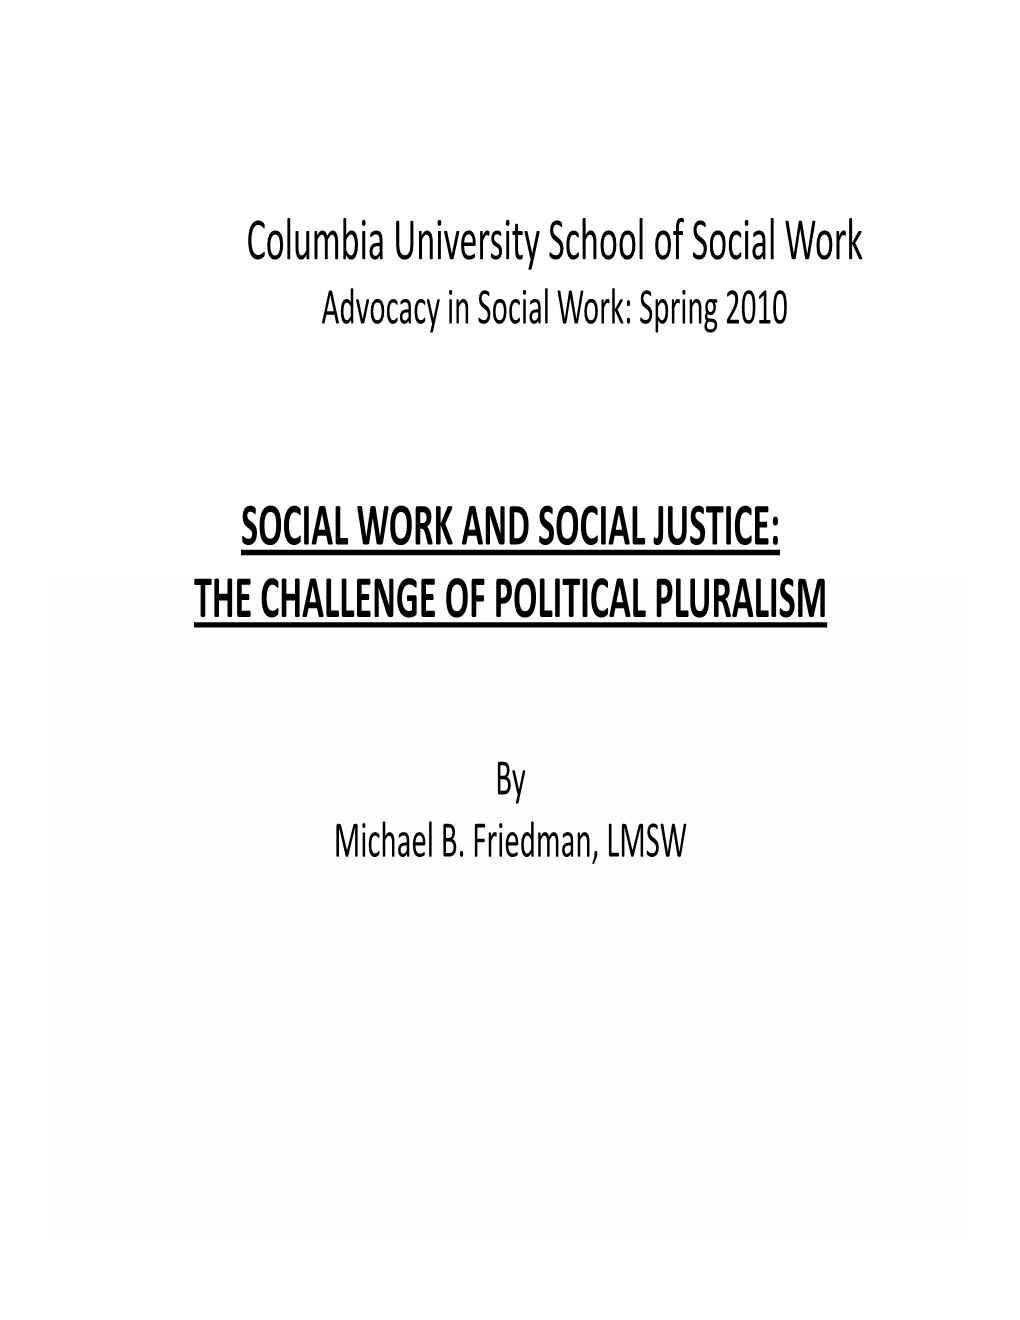 Social Work and Social Justice: the Challenge of Political Pluralism